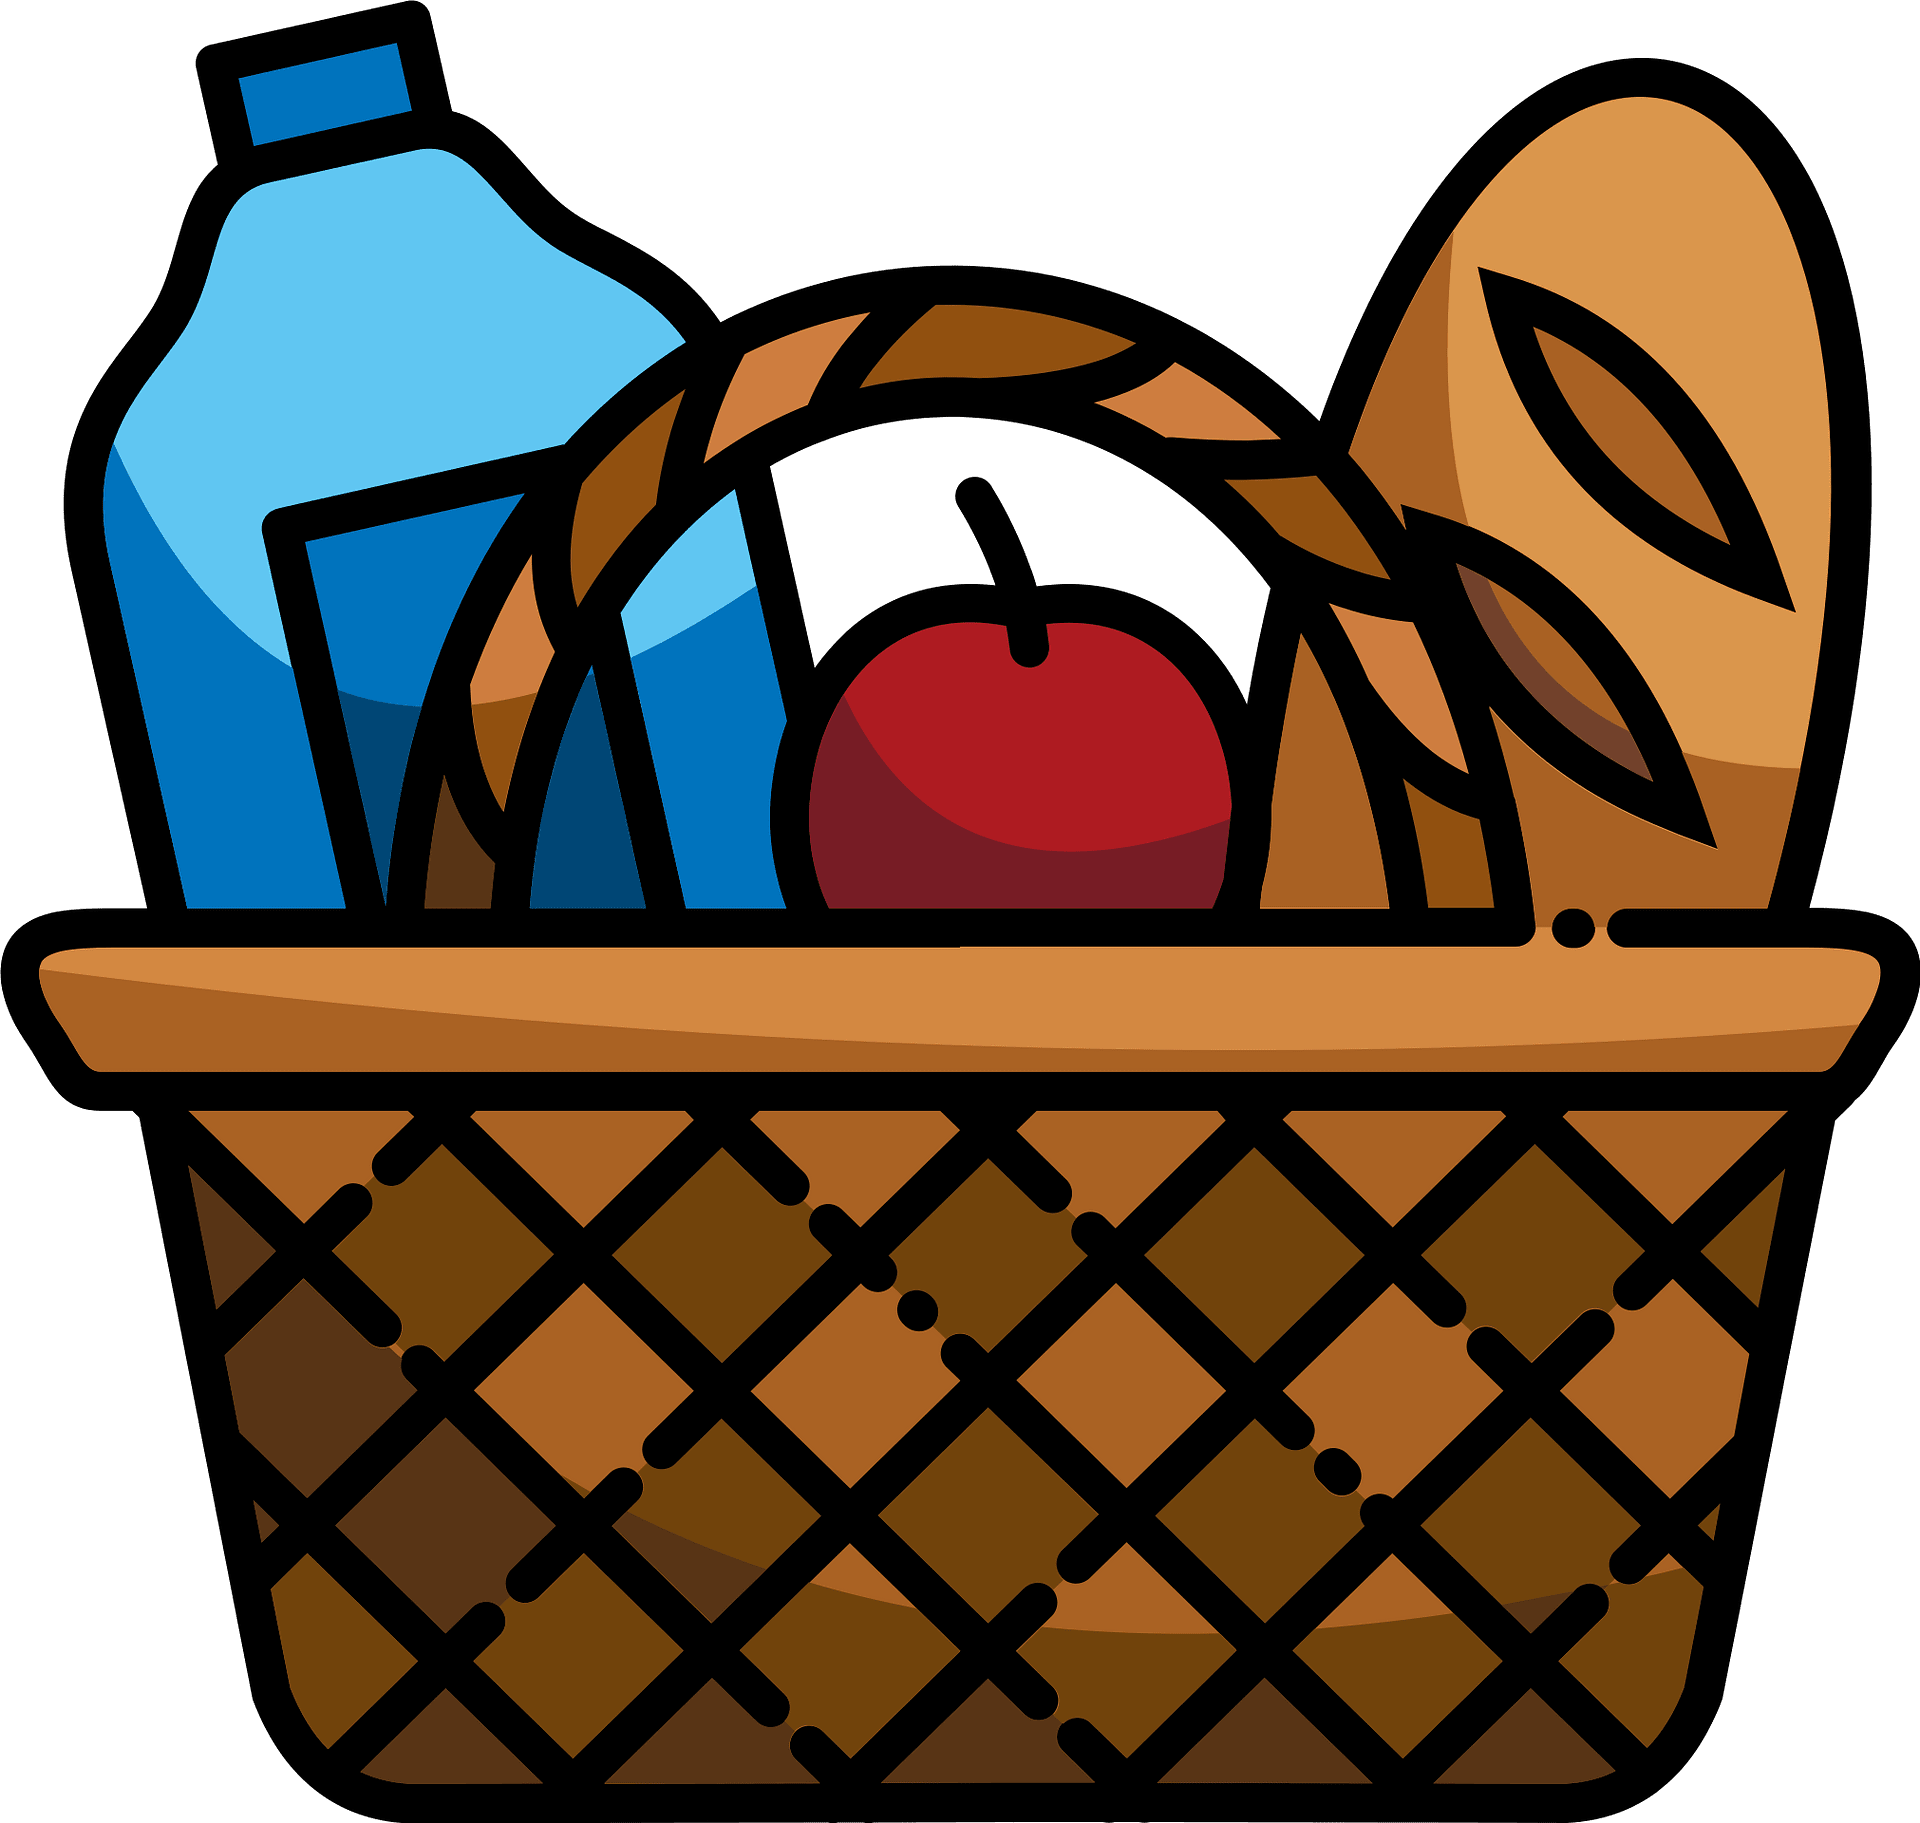 Put Dirty Clothes In Hamper Clip Art free image download - Clip Art Library